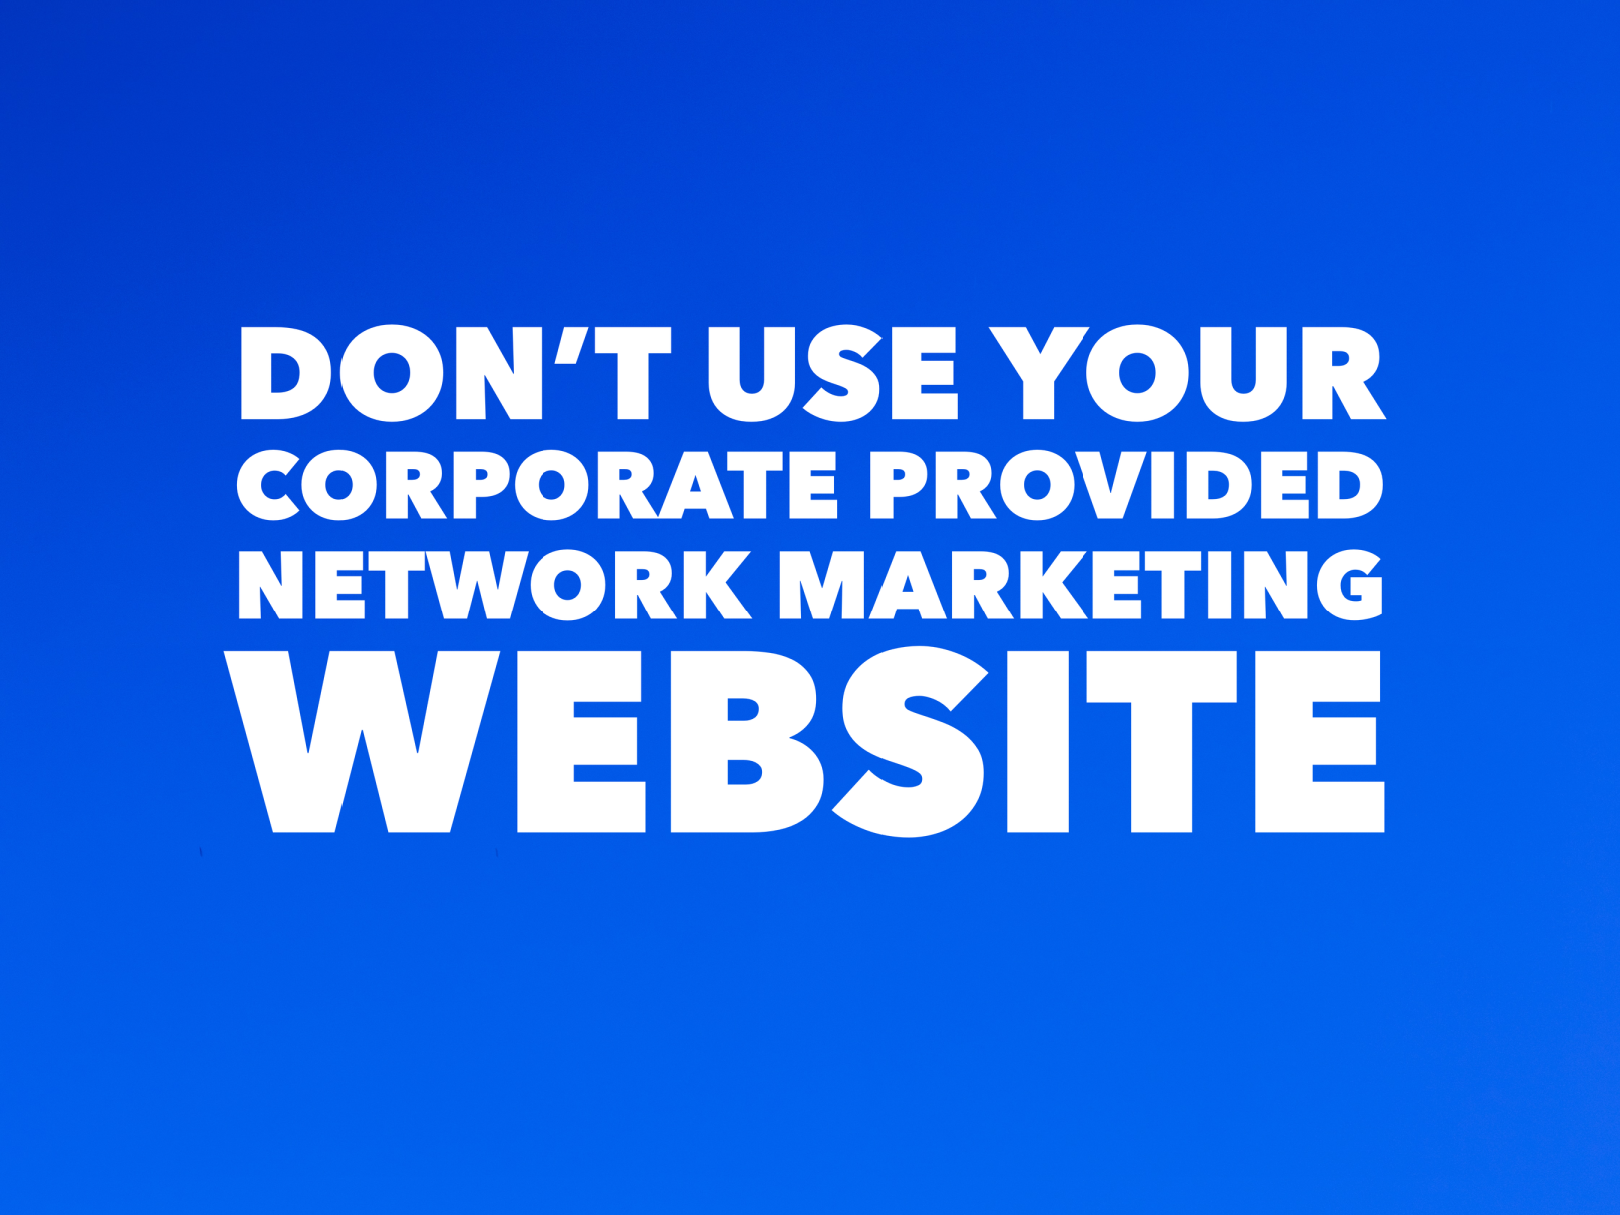 Corporate provided network marketing website not working for you?